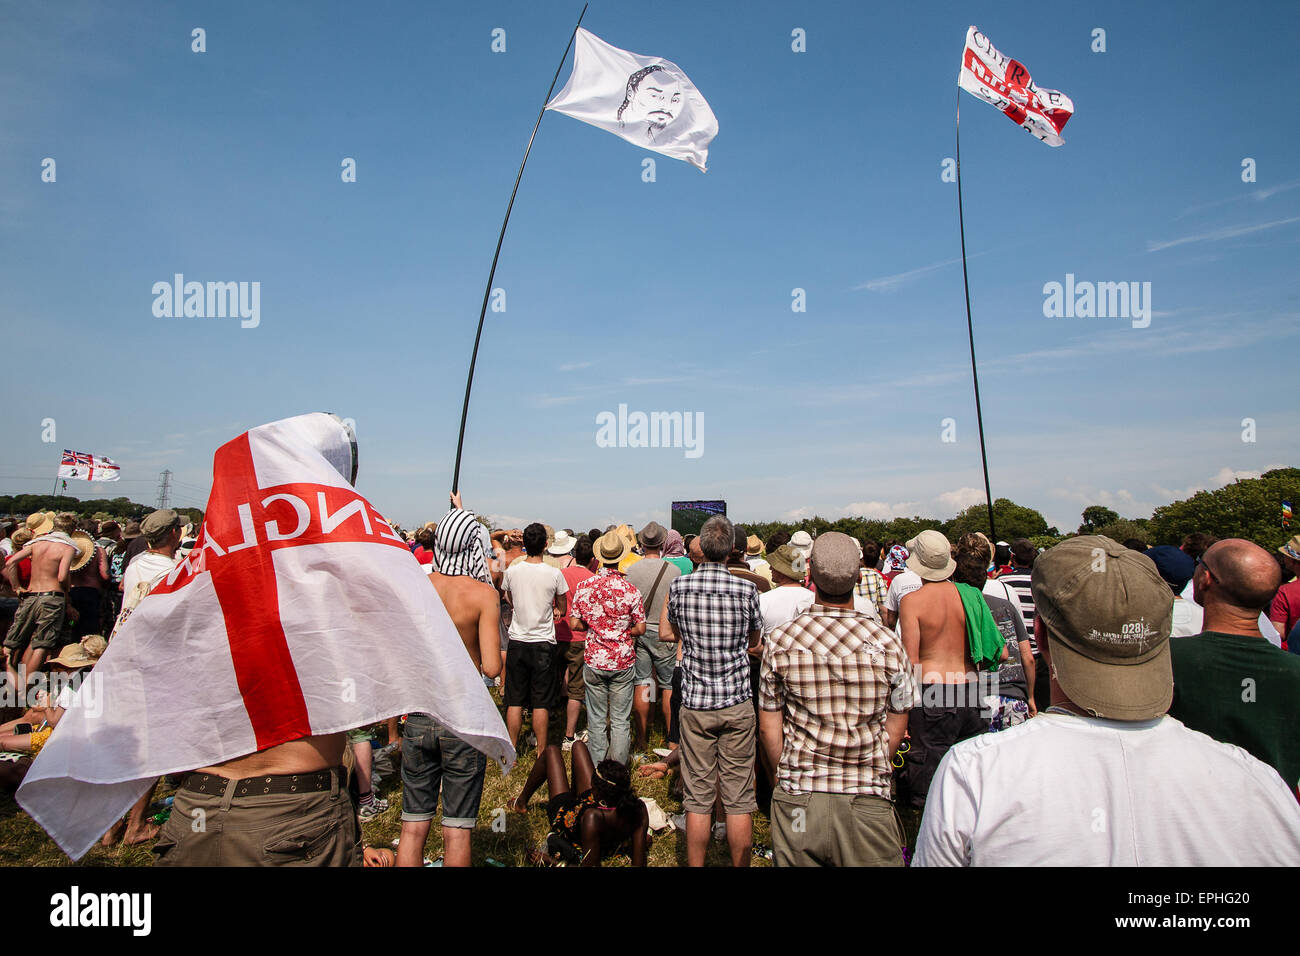 Thousands of football fans watched the football World Cup on giant screens area Glastonbury Festival/ 'Glasto' held on working farm, Worthy Farm, near village of Pilton. Here England football fans watch England lose to 4-1 to Germany. Glastonbury Festival. Somerset, England. June. Stock Photo